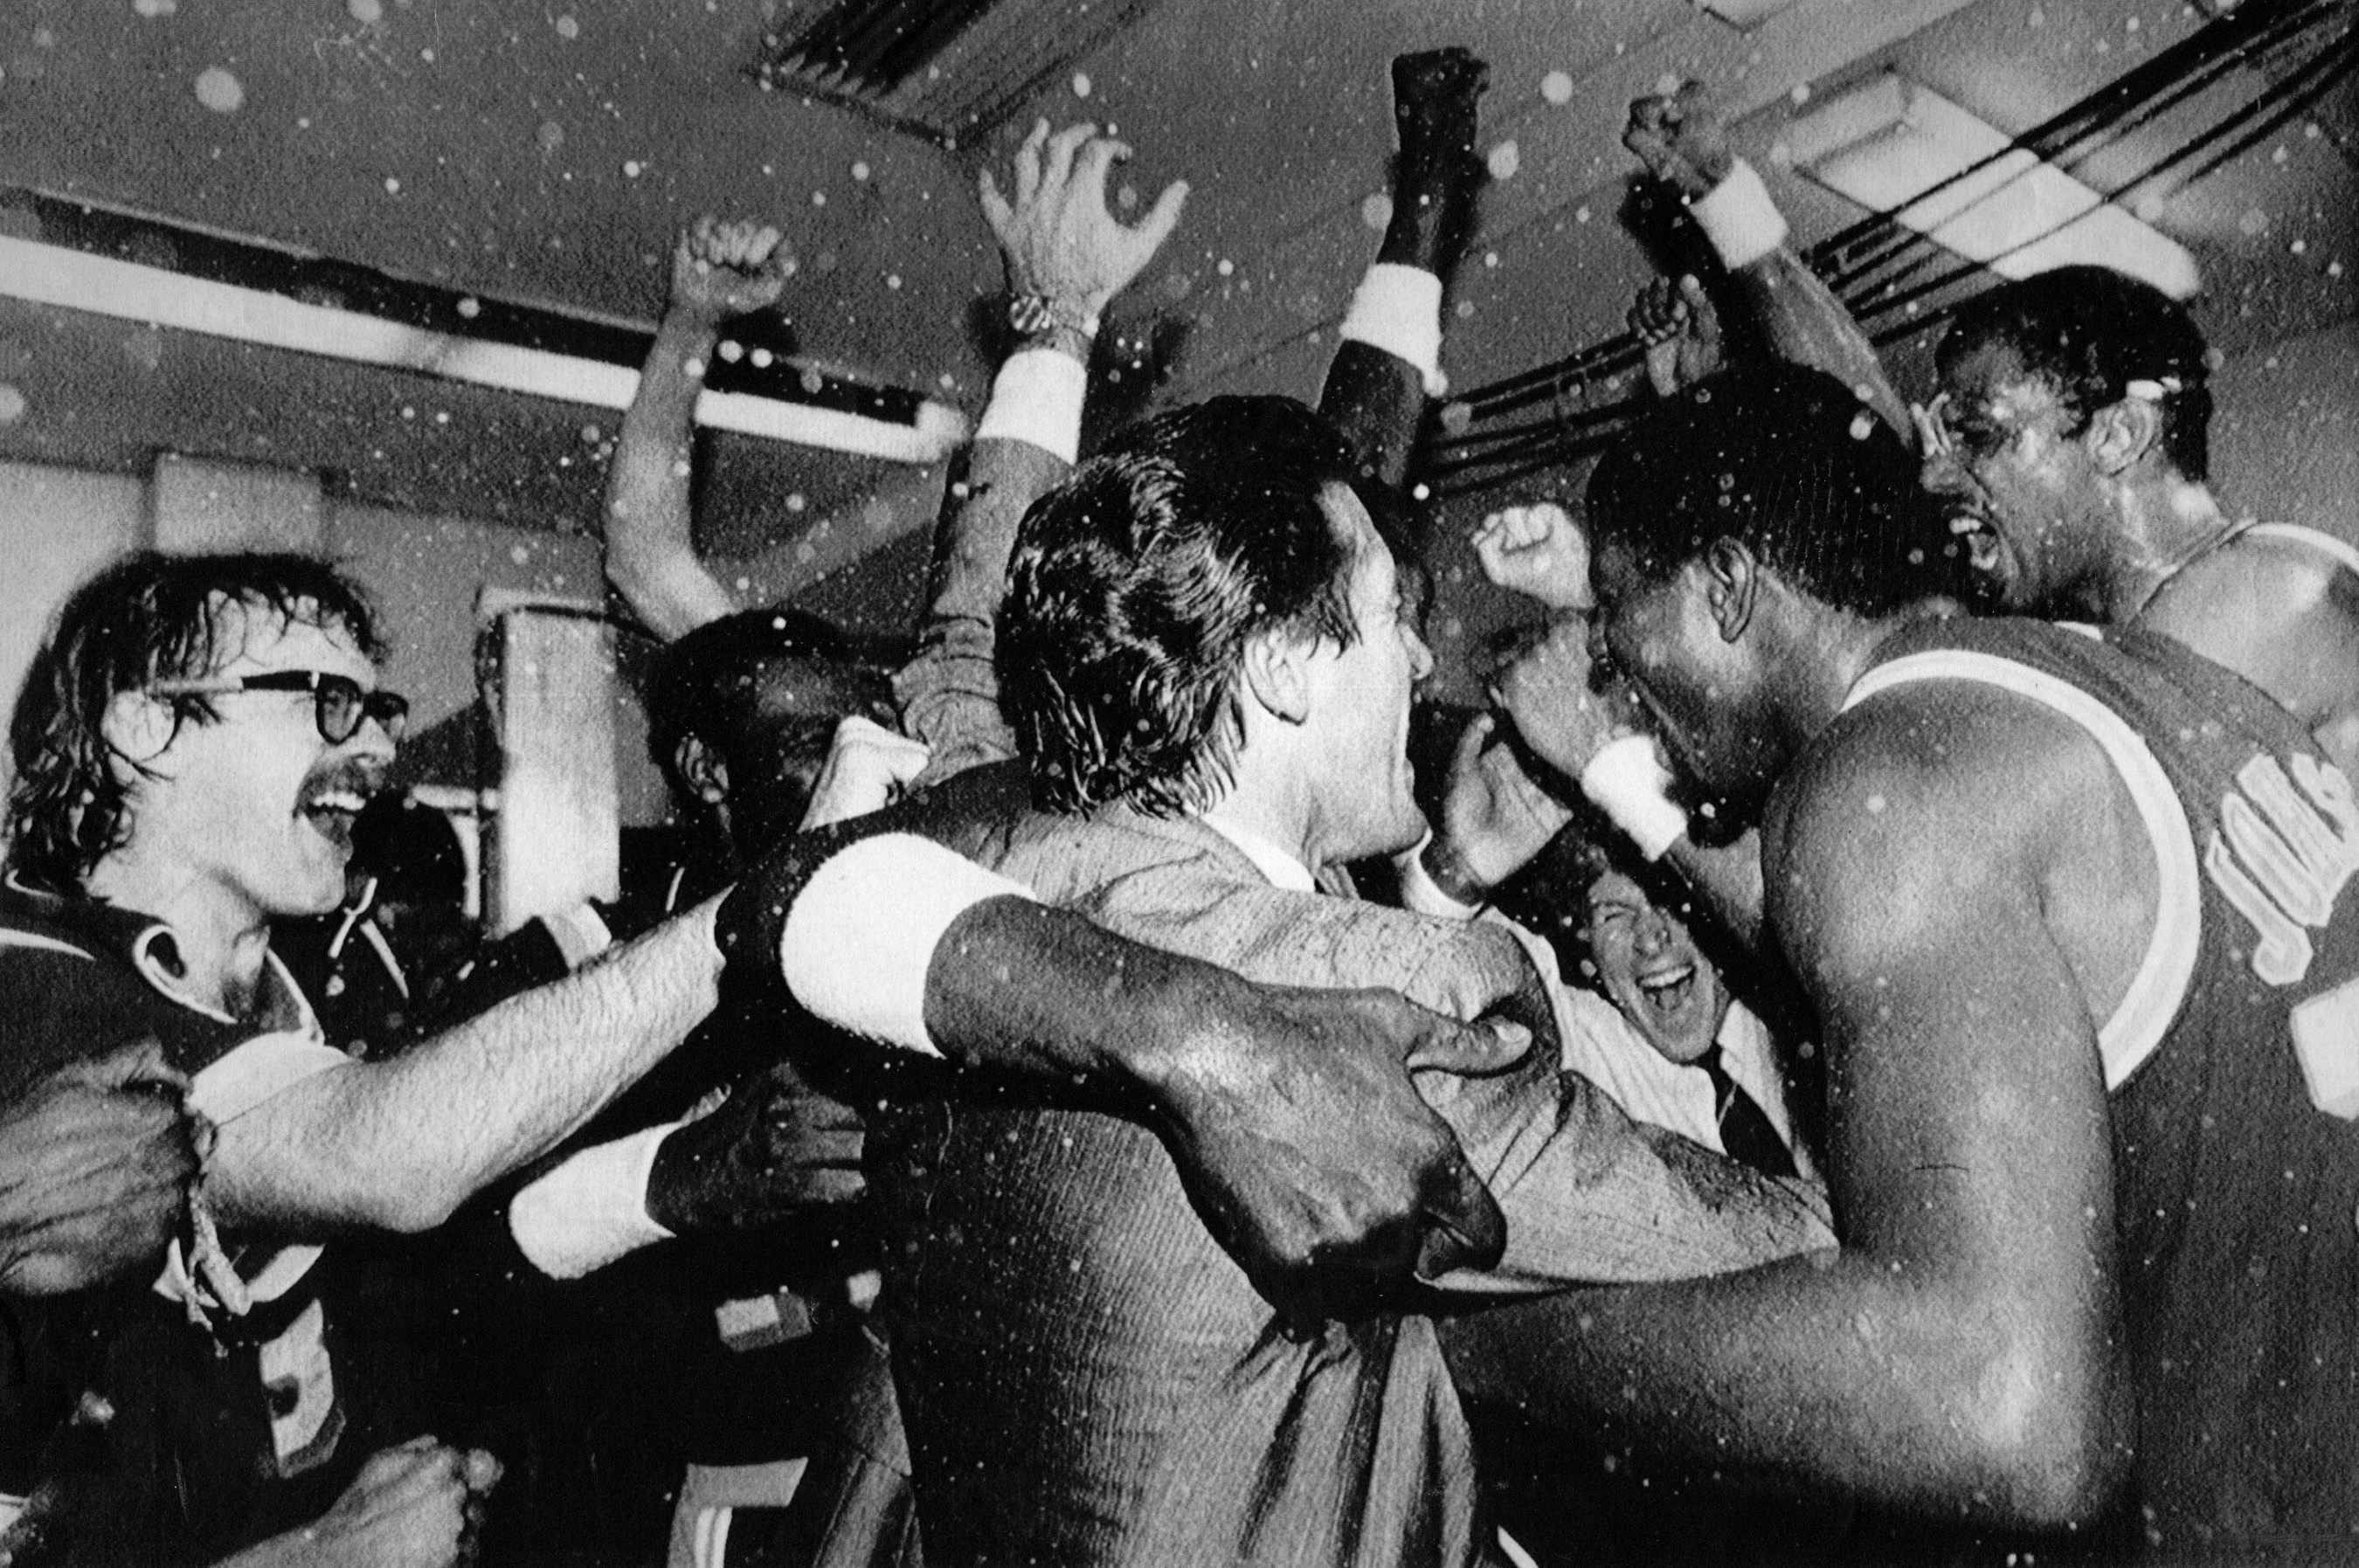 Los Angeles Lakers forward Kurt Rambis, left, coach Pat Riley, center, and Earvin "Magic" Johnson, right, celebrate their 1985 title.